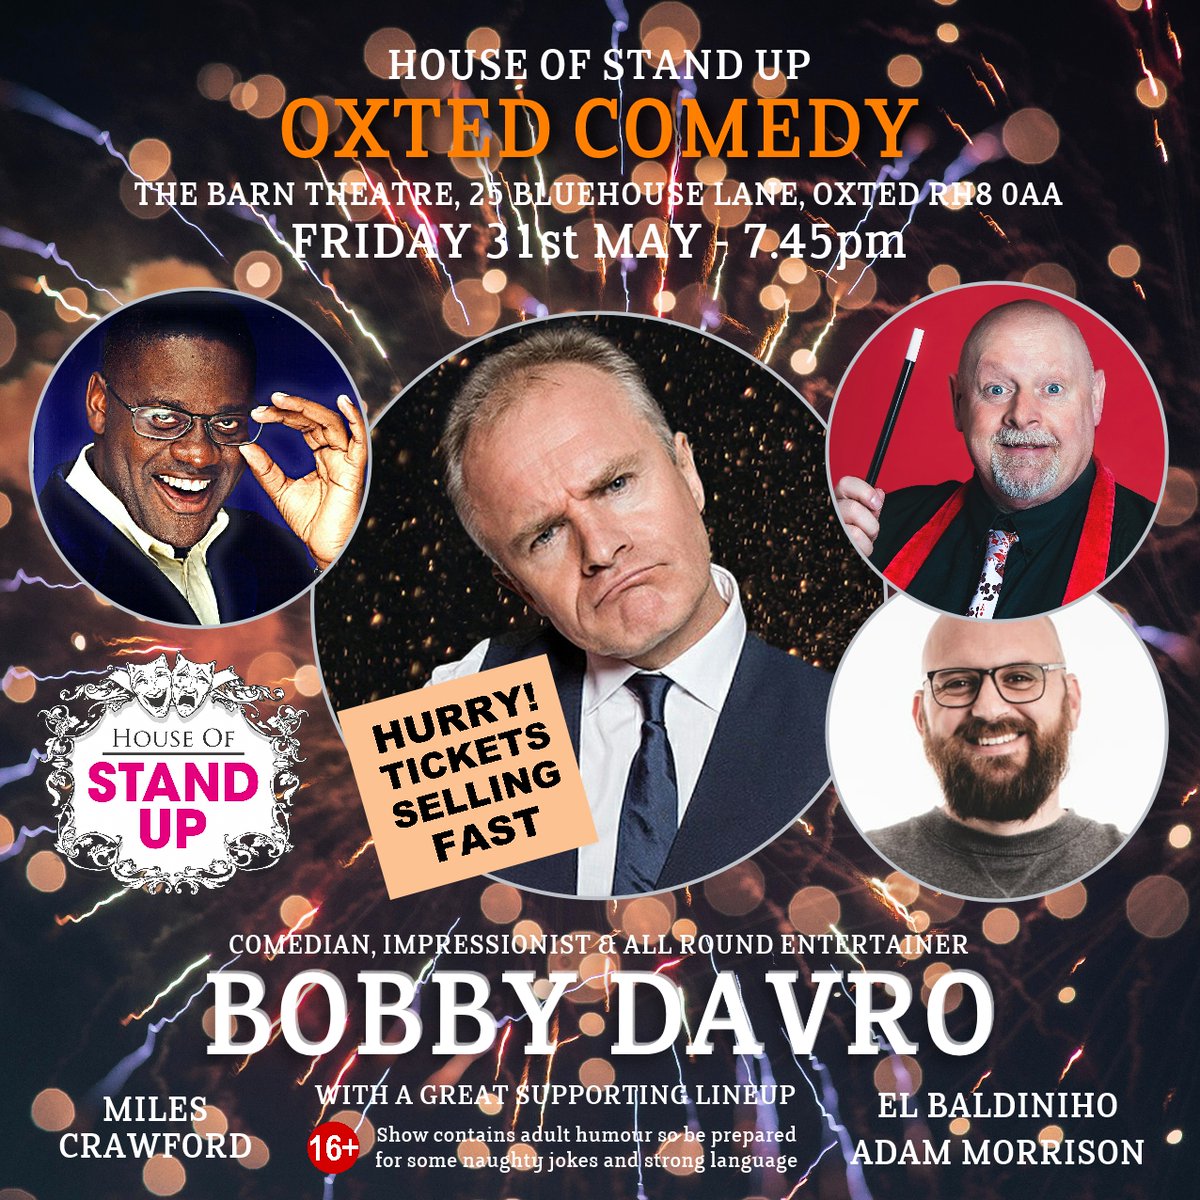 TICKET ALERT - NEARLY SOLD OUT Don't miss out on a night of uproarious laughter as the legendary #BobbyDavro takes centre #stage at #TheBarnTheatre for the #Oxted #Comedy #Centenary #Show! Bobby Davro is Comedy Royalty! Tickets at houseofstandup.co.uk/oxted #standupcomedy #tickets